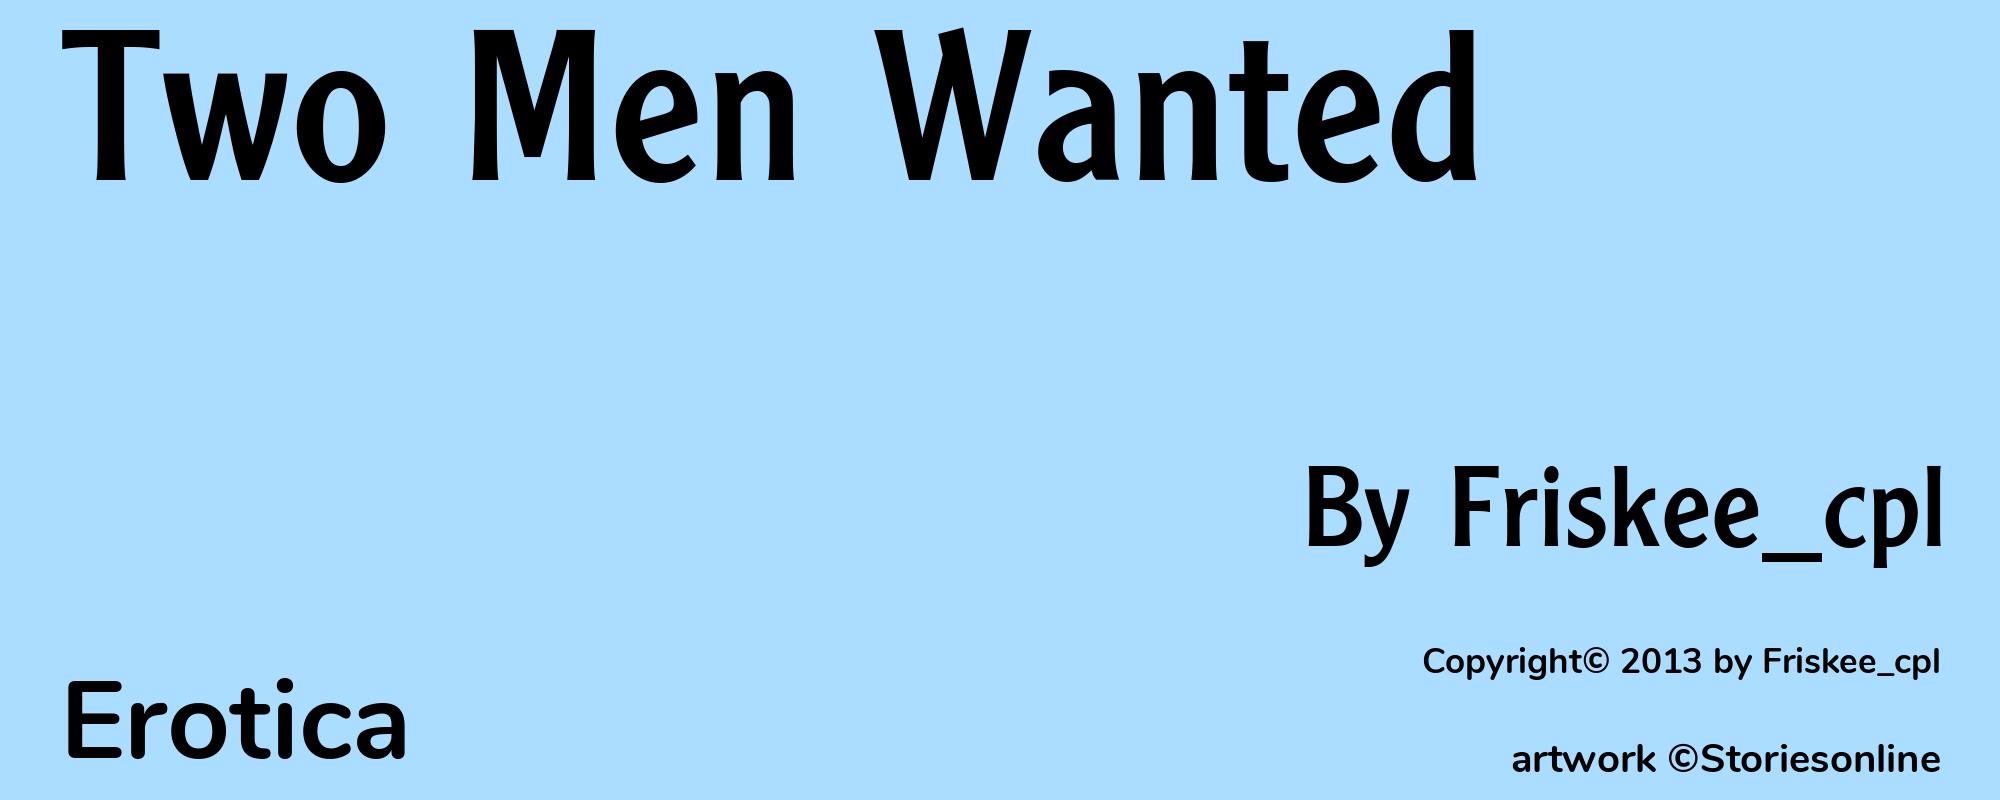 Two Men Wanted - Cover